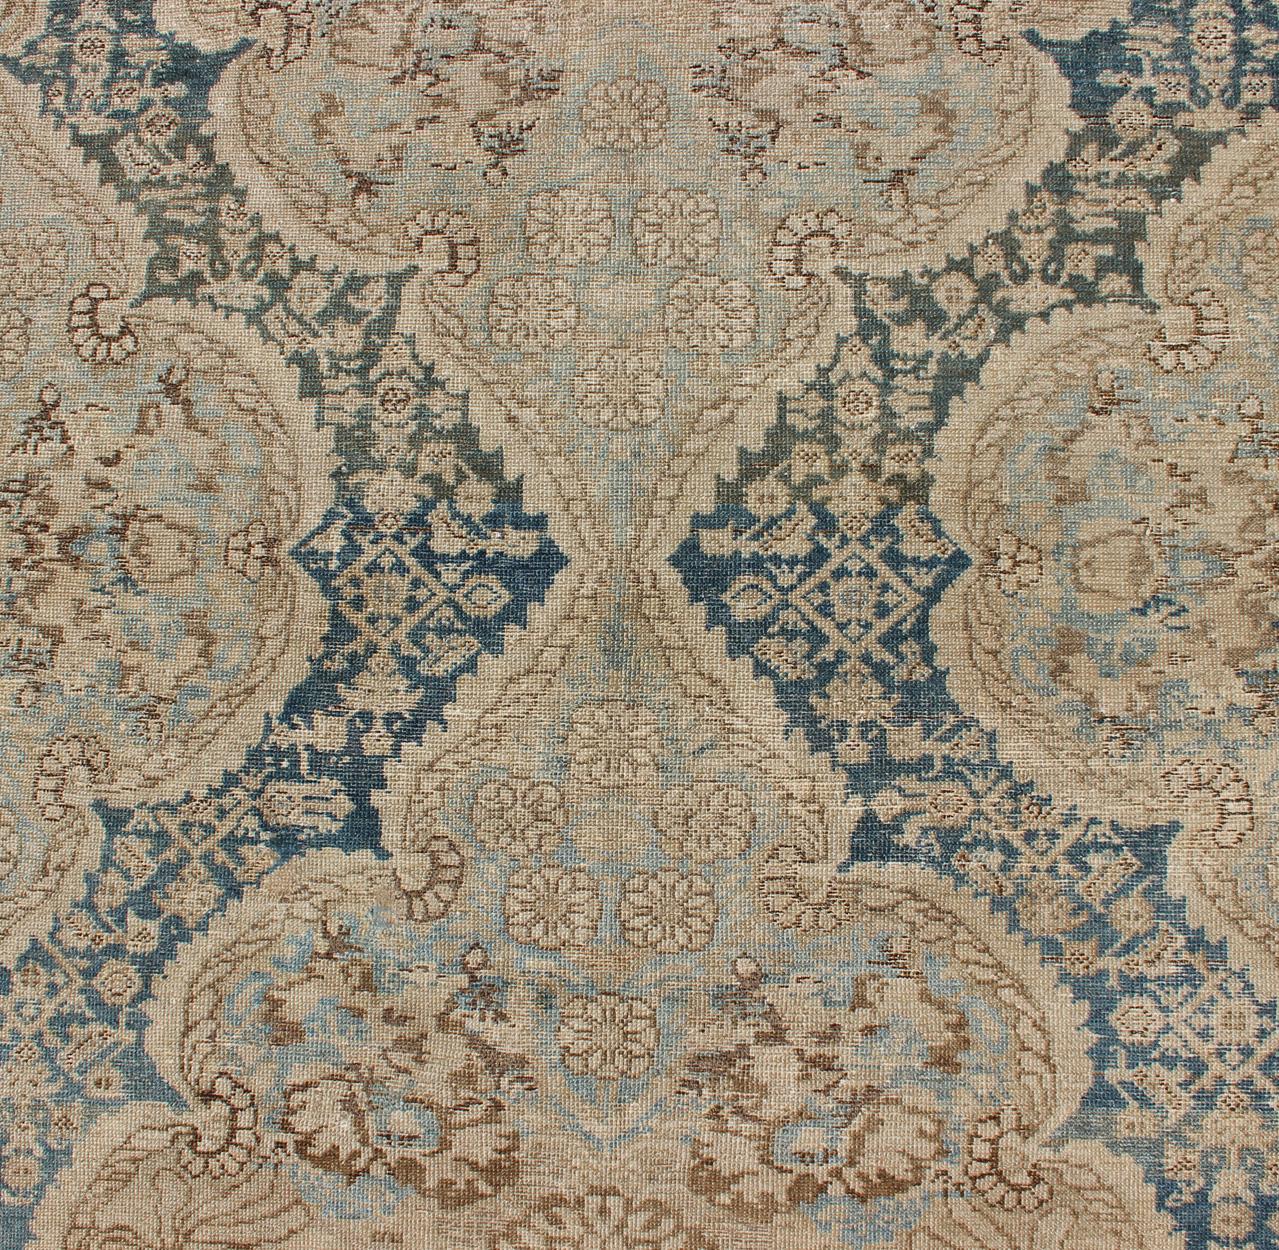 Hand-Knotted Blue and Brown Antique Persian Malayer Short Gallery Rug with Floral Medallions